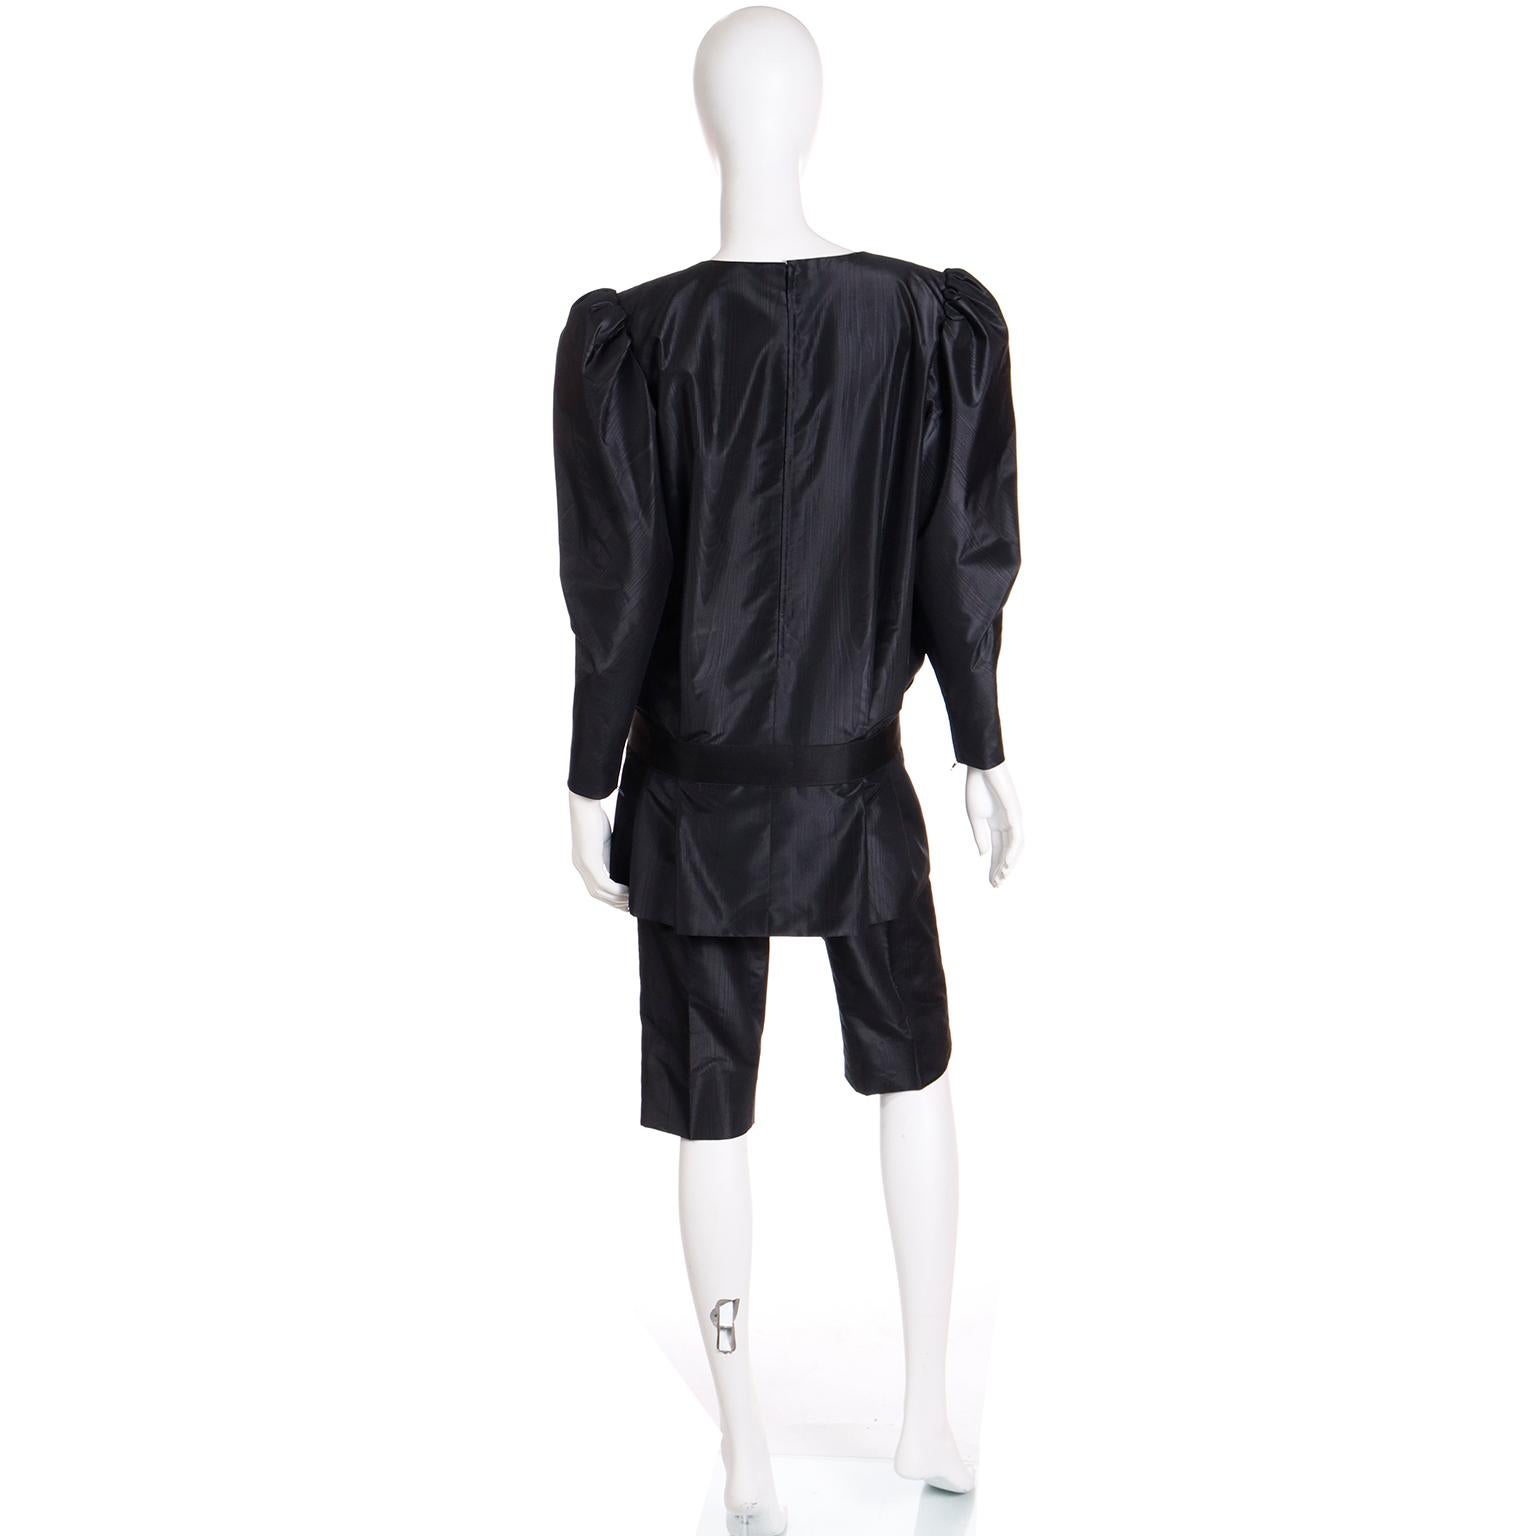 Women's Givenchy Haute Couture Vintage 1980s Black Satin Shorts & Top Outfit